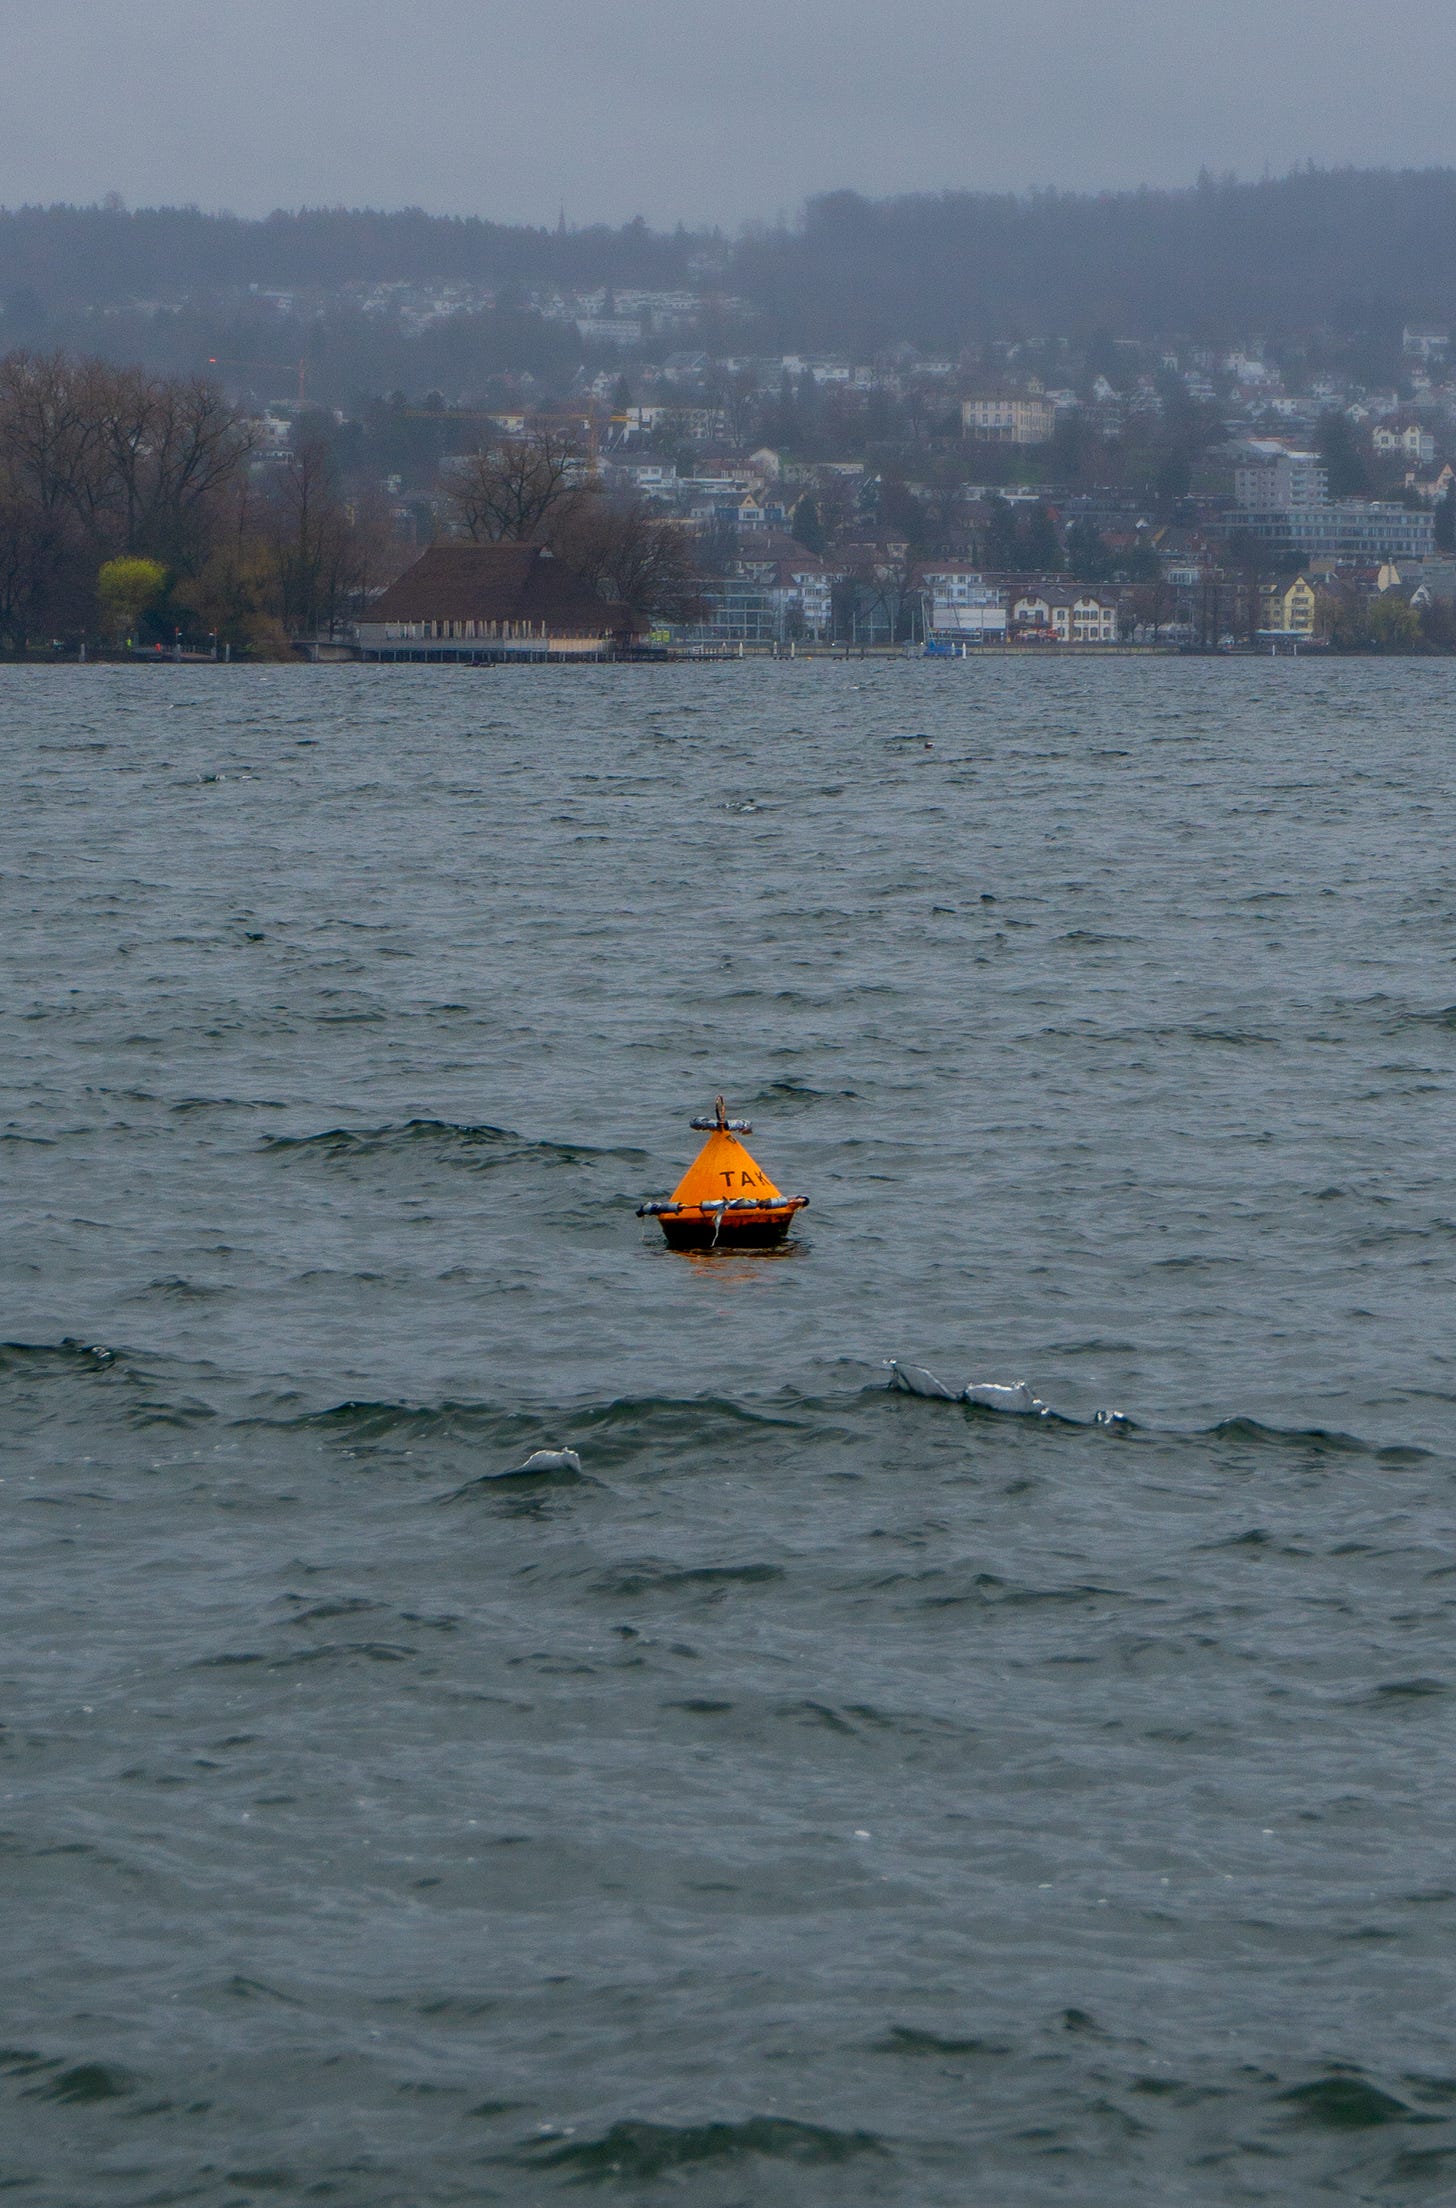 A buoy in the water